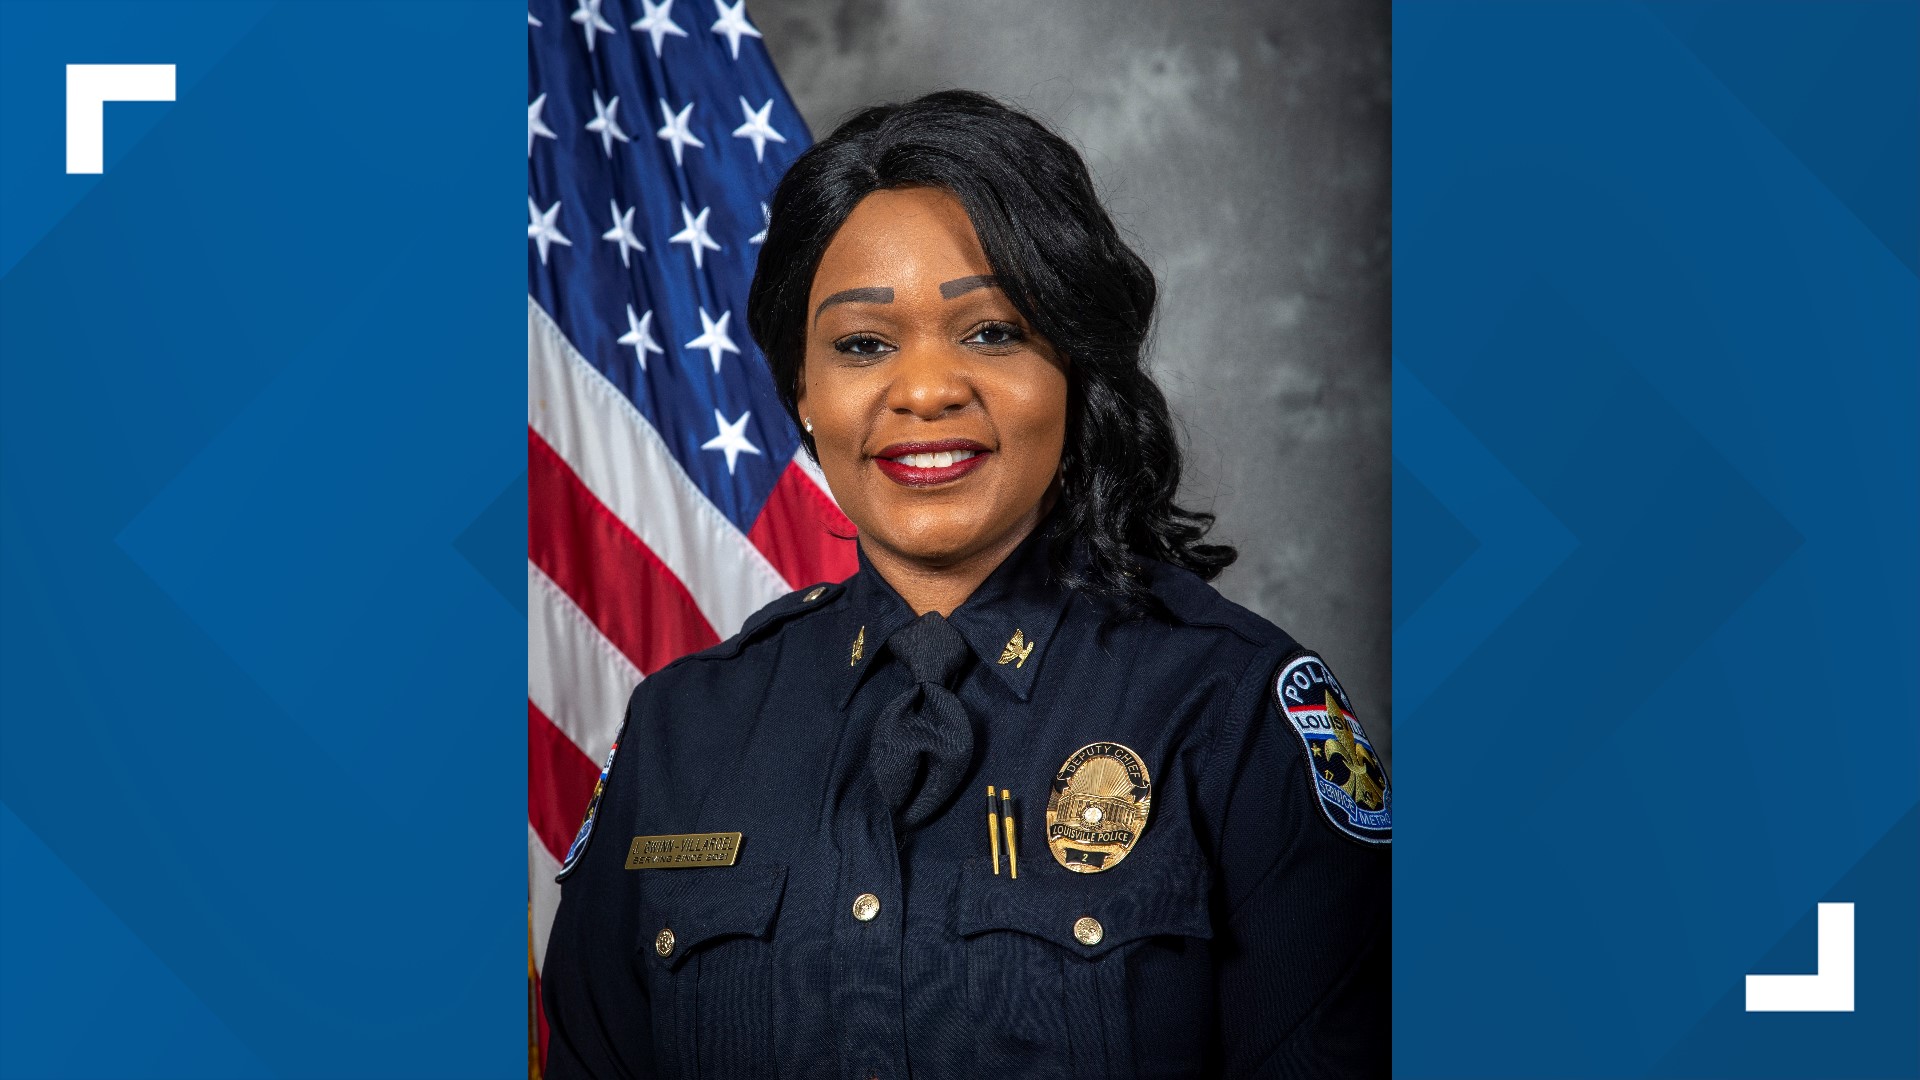 "Louisville has welcomed me with open arms and I am honored to be the leader of our Police Department," Gwinn-Villaroel said.